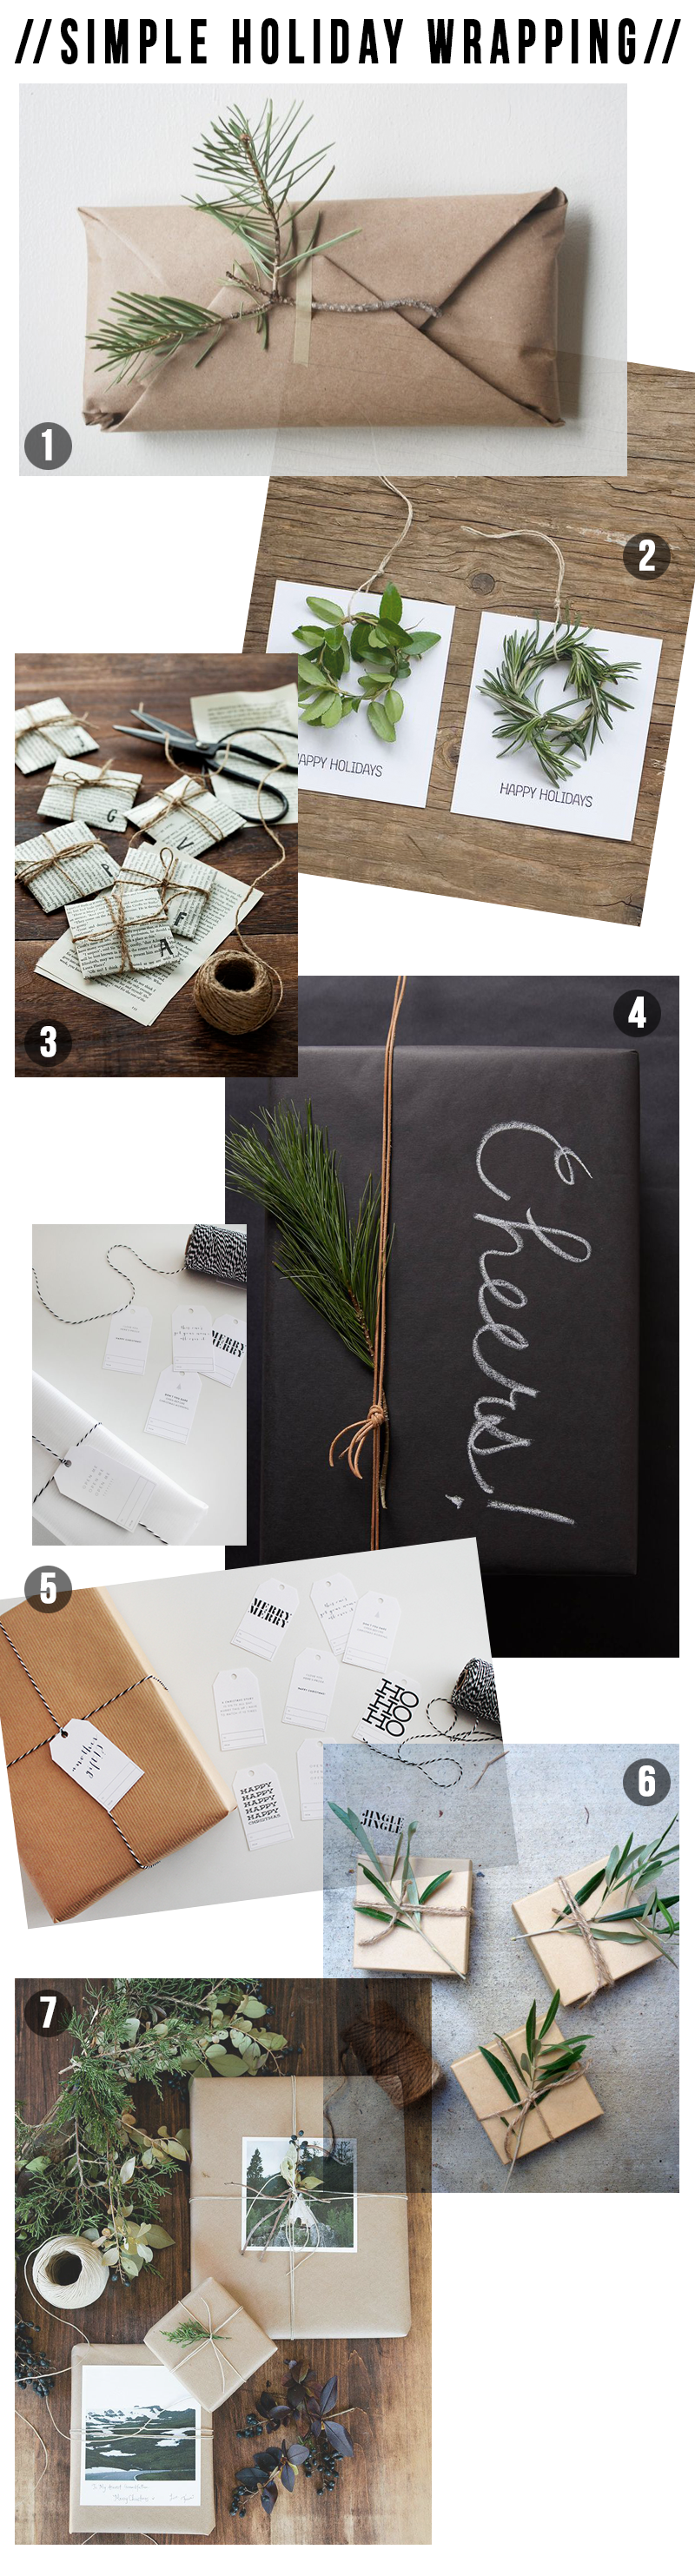 Simple Holiday Wrapping